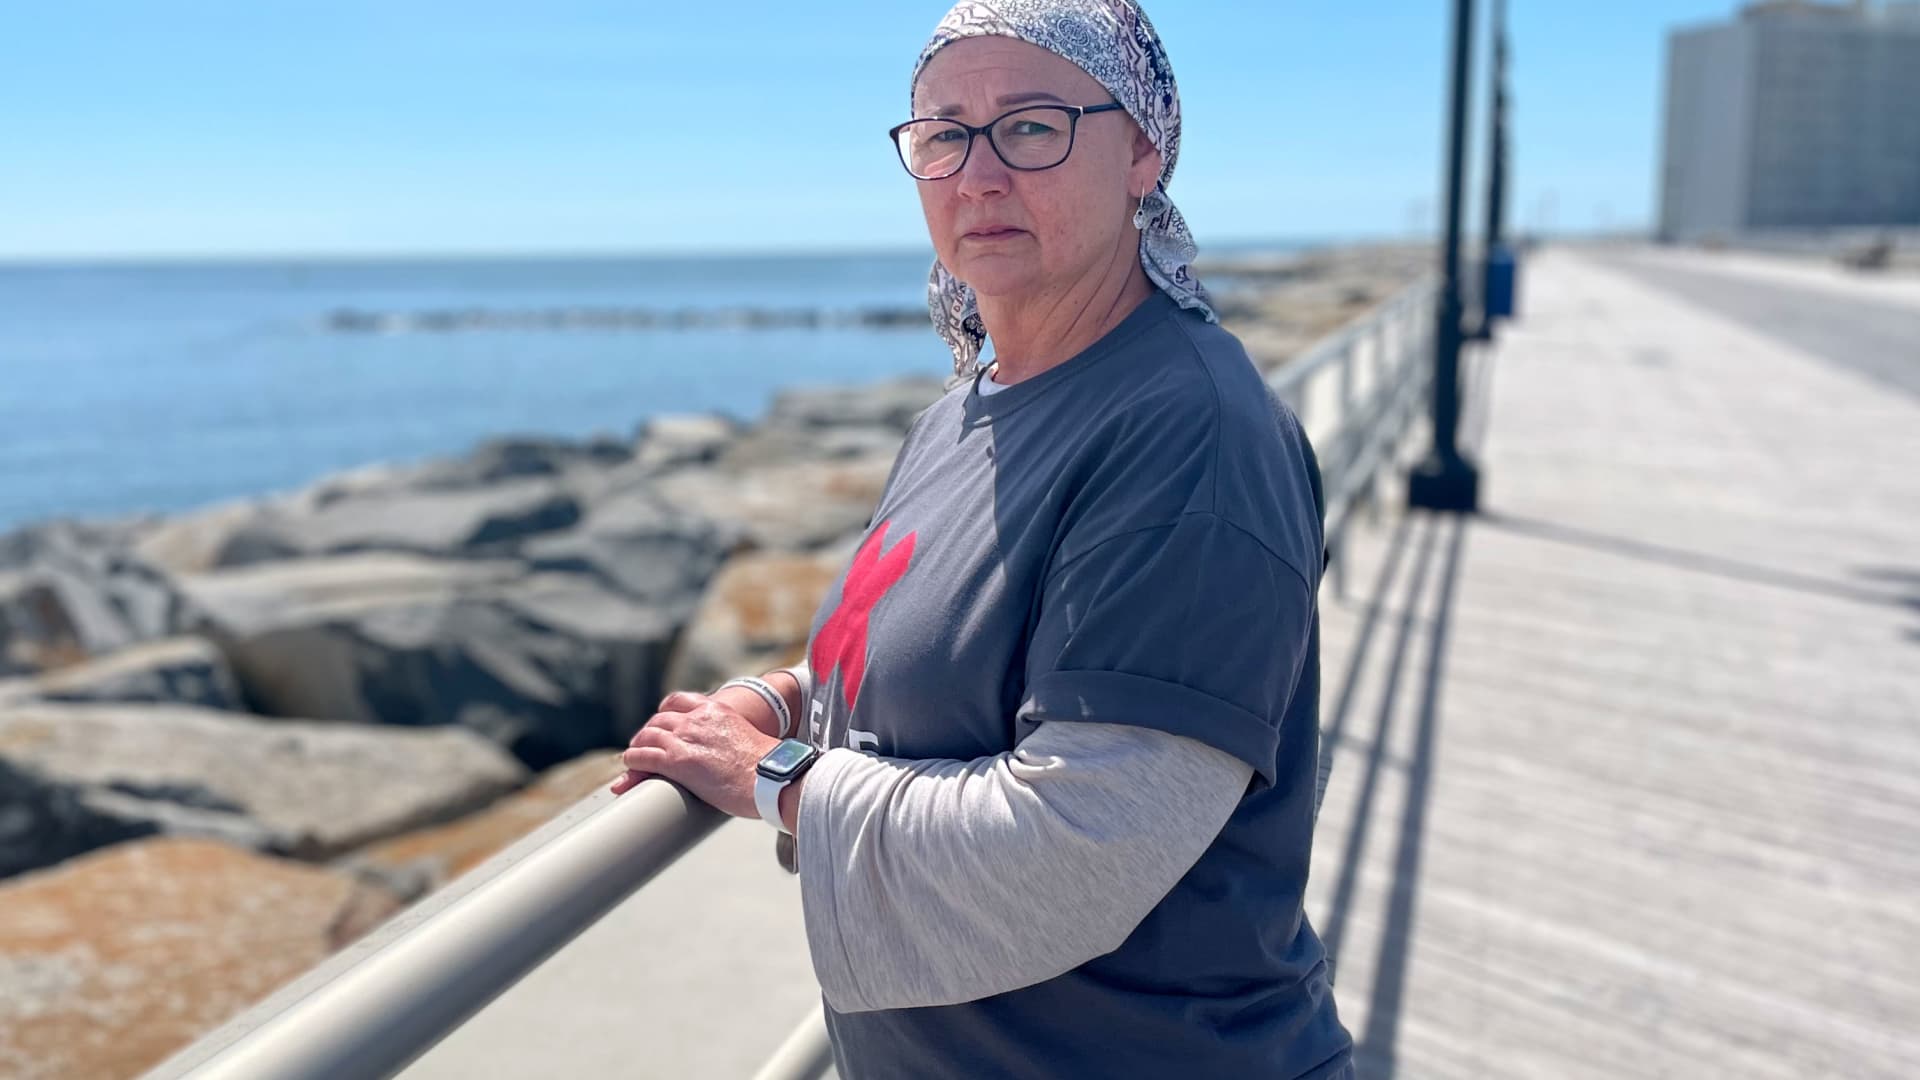 Tammy Brady is fighting to make casinos smoke-free. She was diagnosed with cancer after 37 years of being a casino dealer.